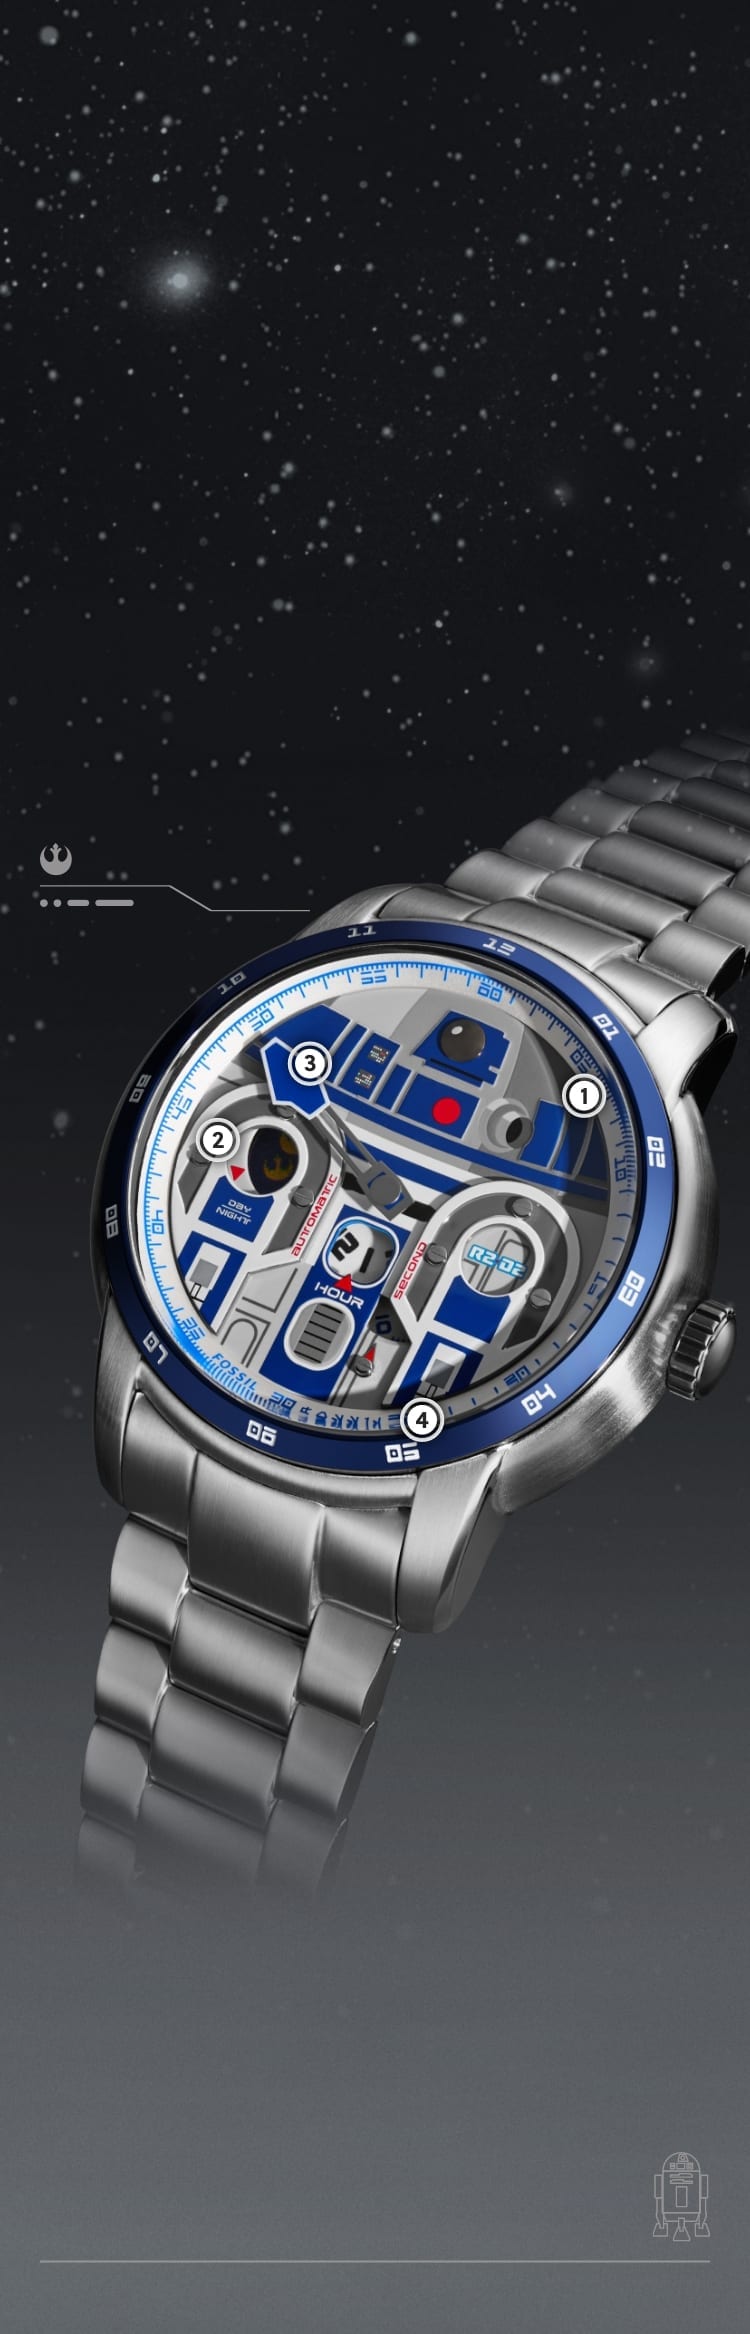 A close-up shot of a silver-tone watch with a dimensional applique of R2-D2 on the dial